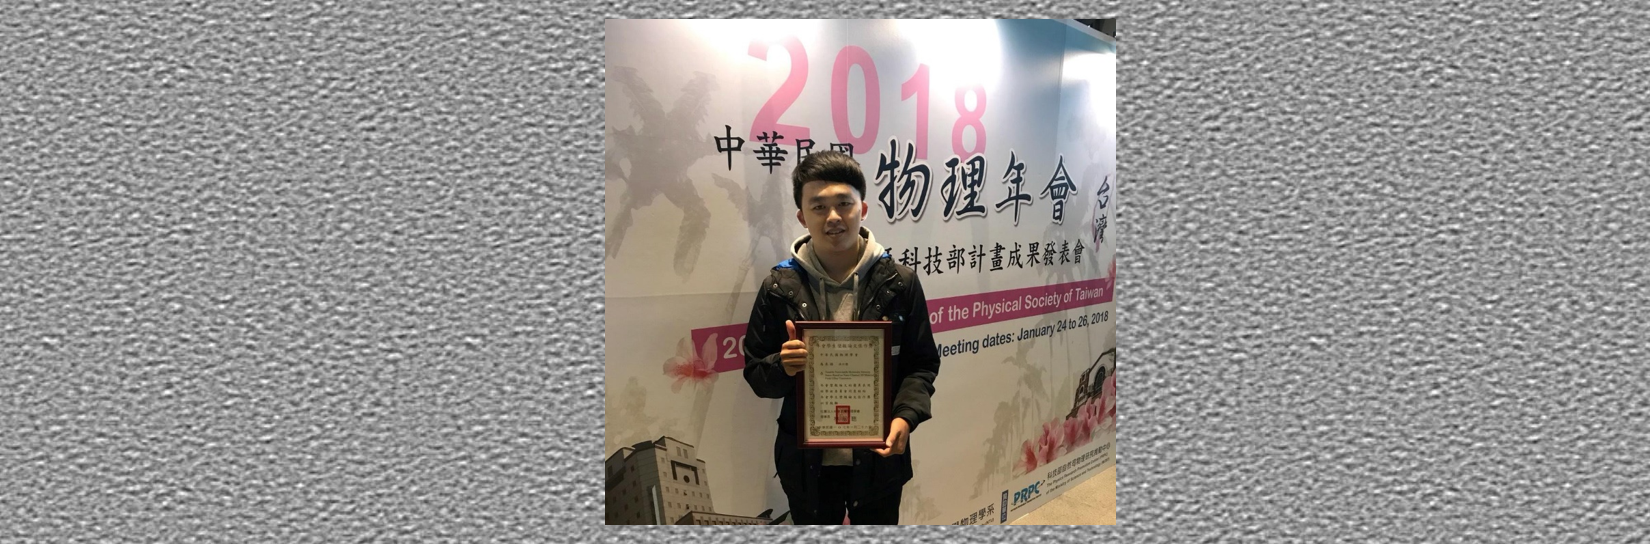 Cheers! Chuan-Jie Hong is awarded honorable mention in 2018 Annual Meeting of the Physical Society of Taiwan